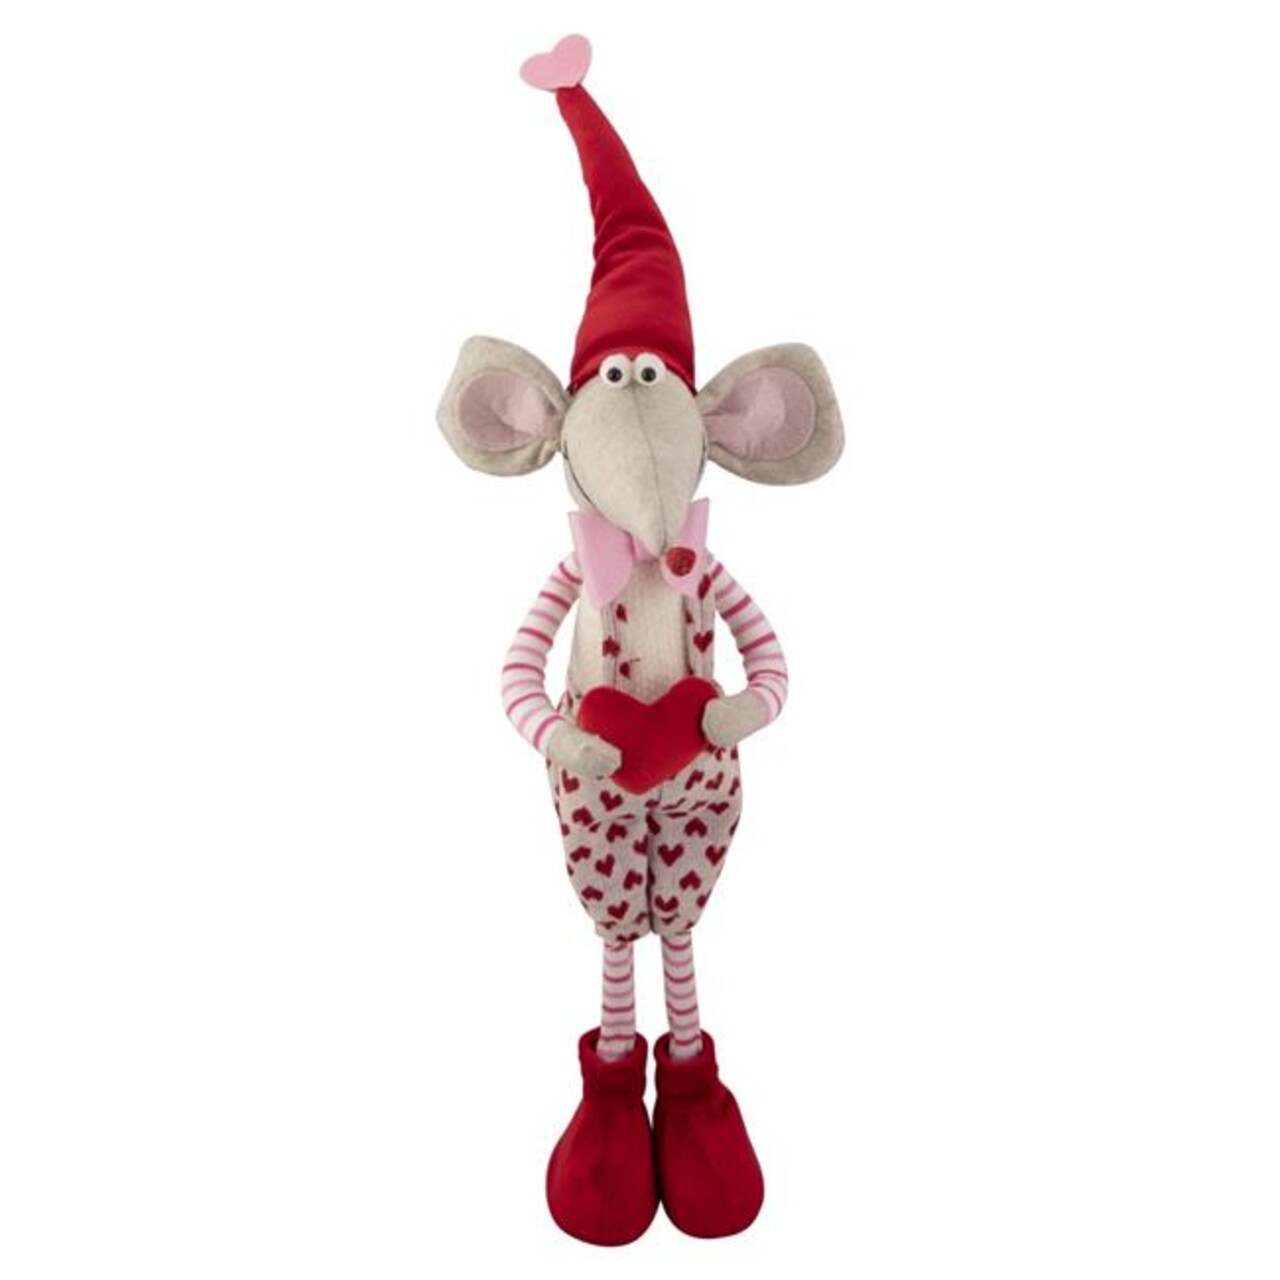 Northlight 35118064 21 in. Standing Plush Boy Mouse Valentines Day Figure